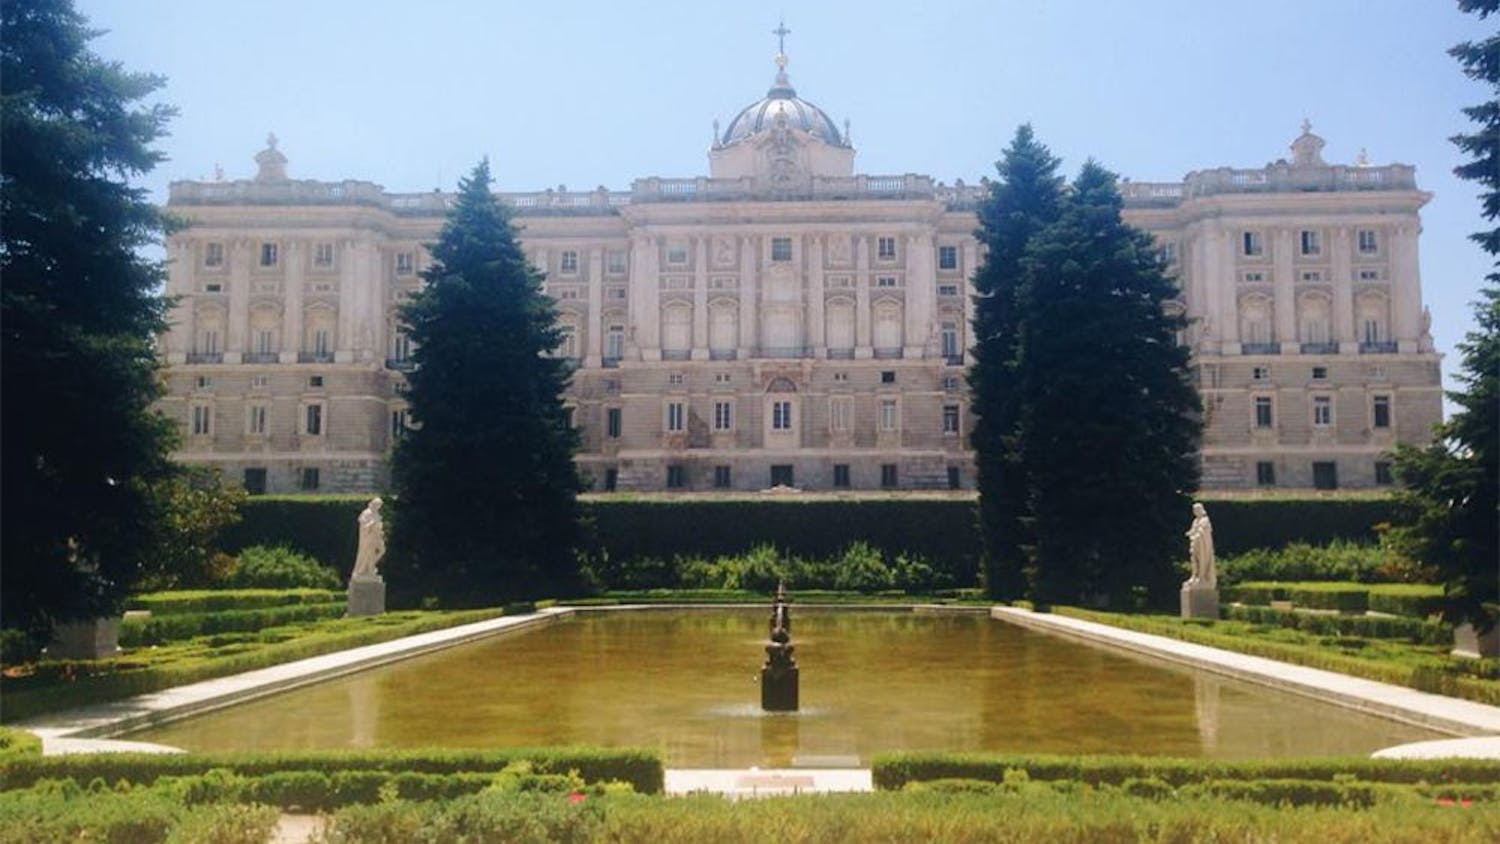 The Palacio Real de Madrid seen from the Jardin Sabatini.  The palace is the official residence of the Spanish Royal Family in the city of Madrid